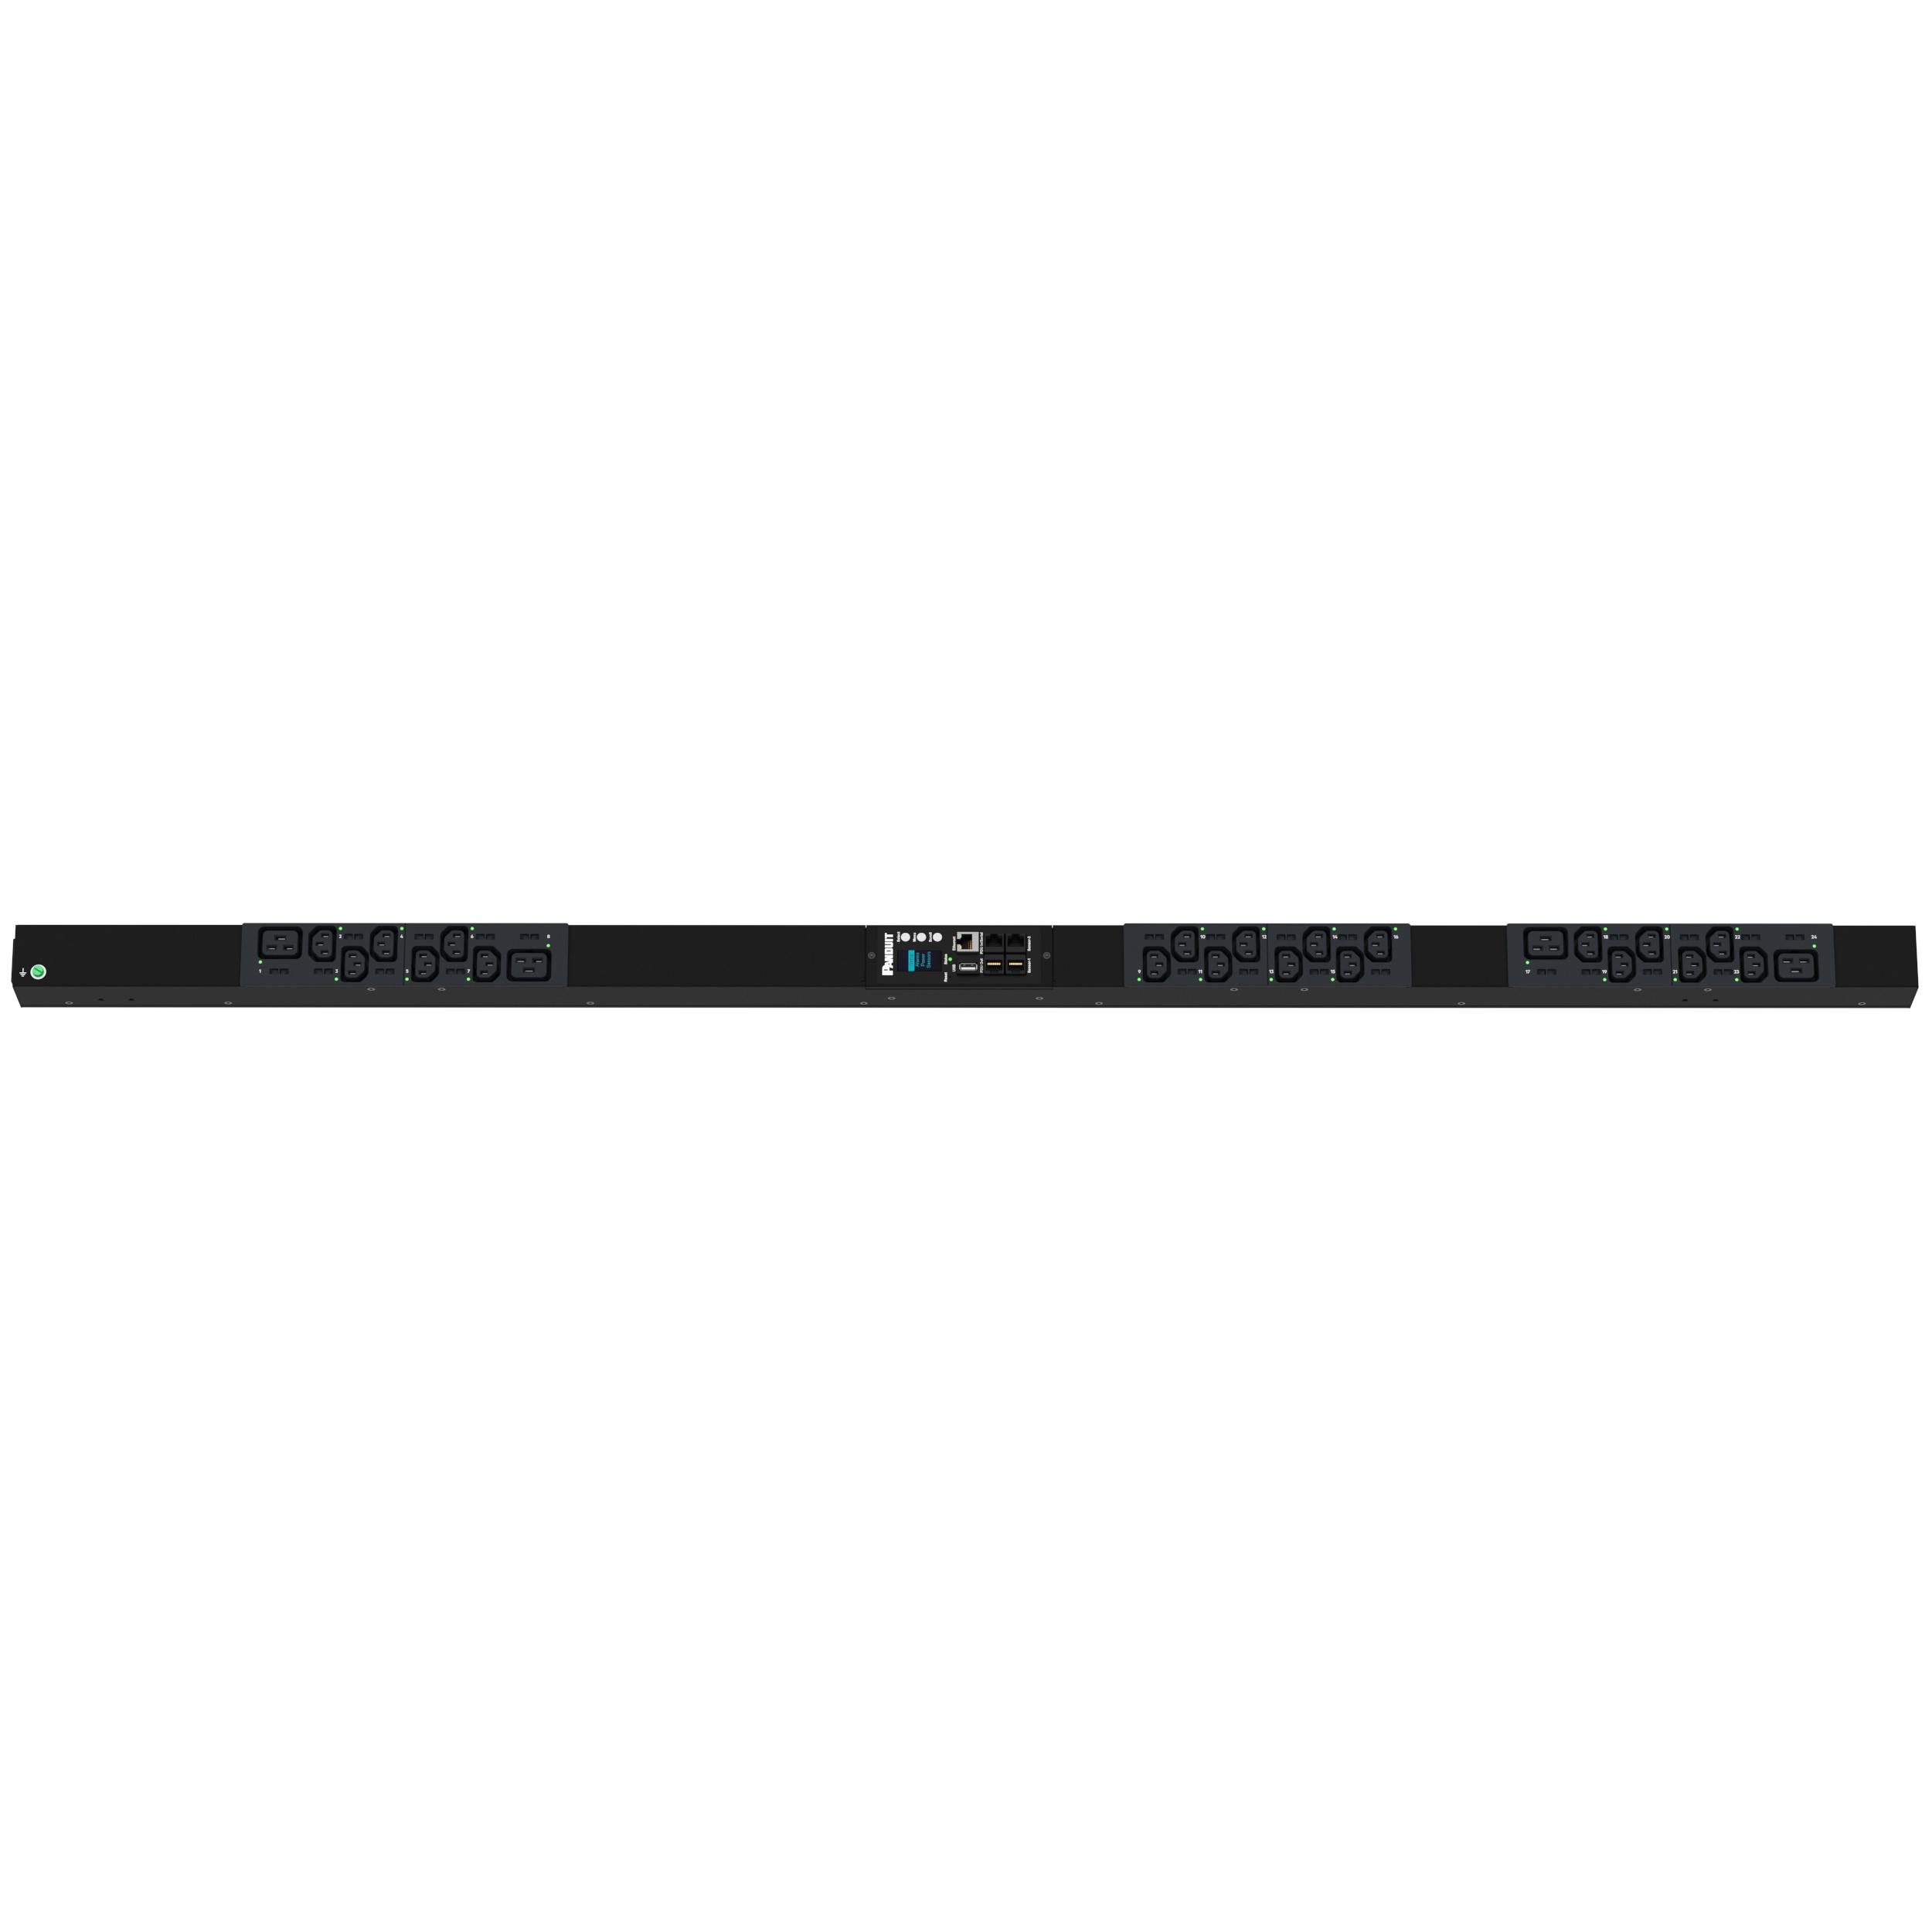 Panduit P24G11M SmartZone™ Monitored & Switched per Outlet PDU